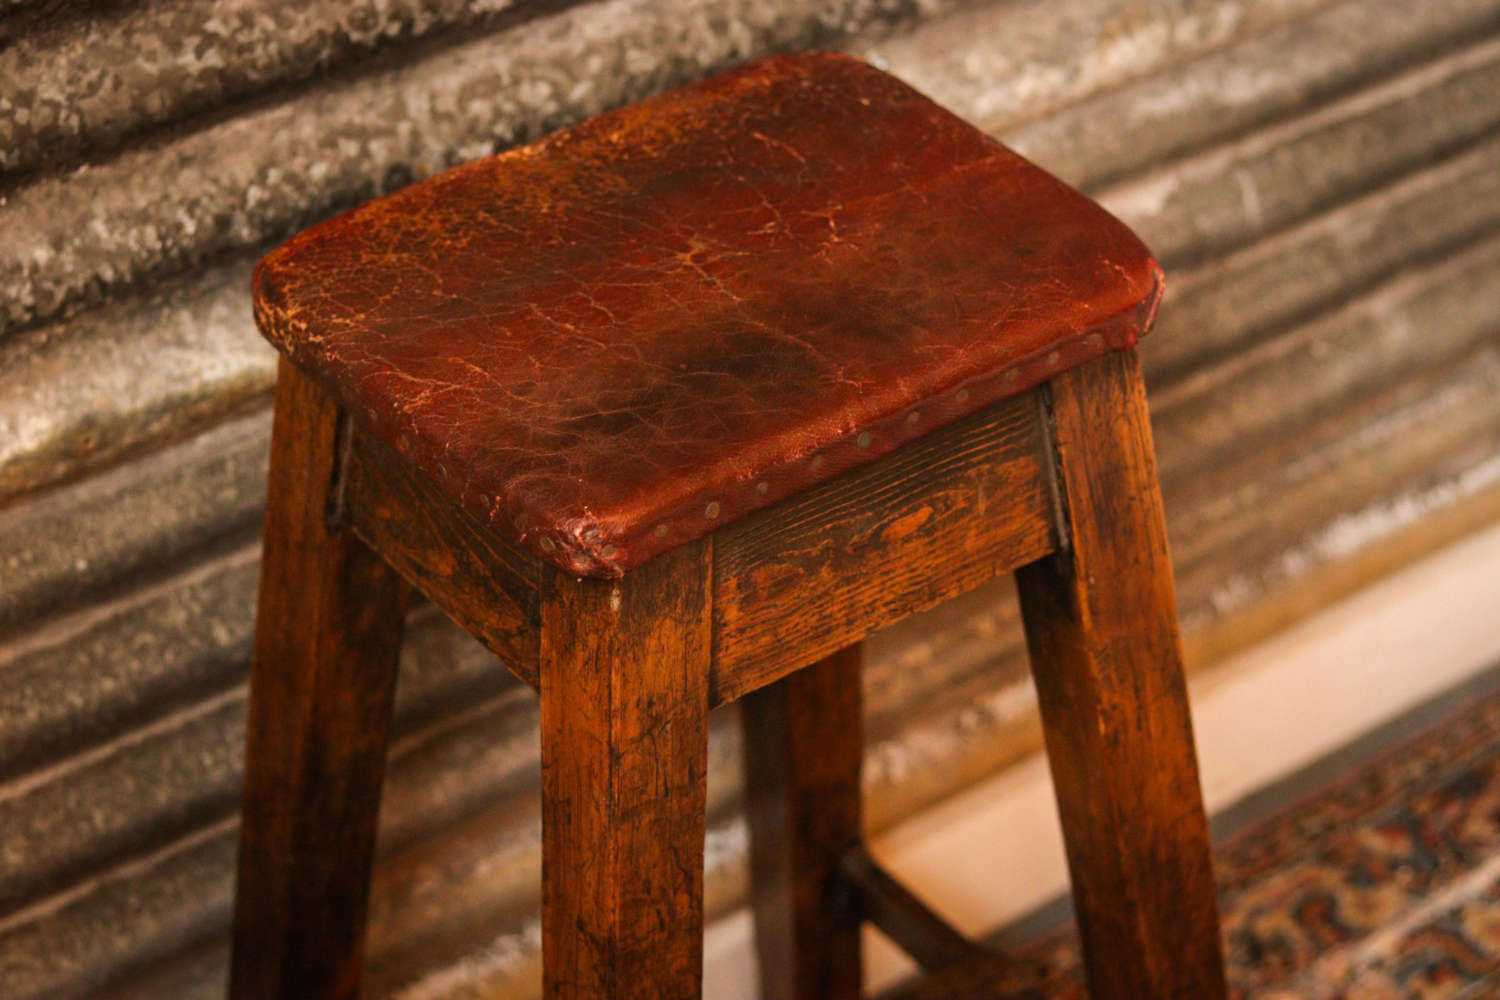 A factory machinists stool